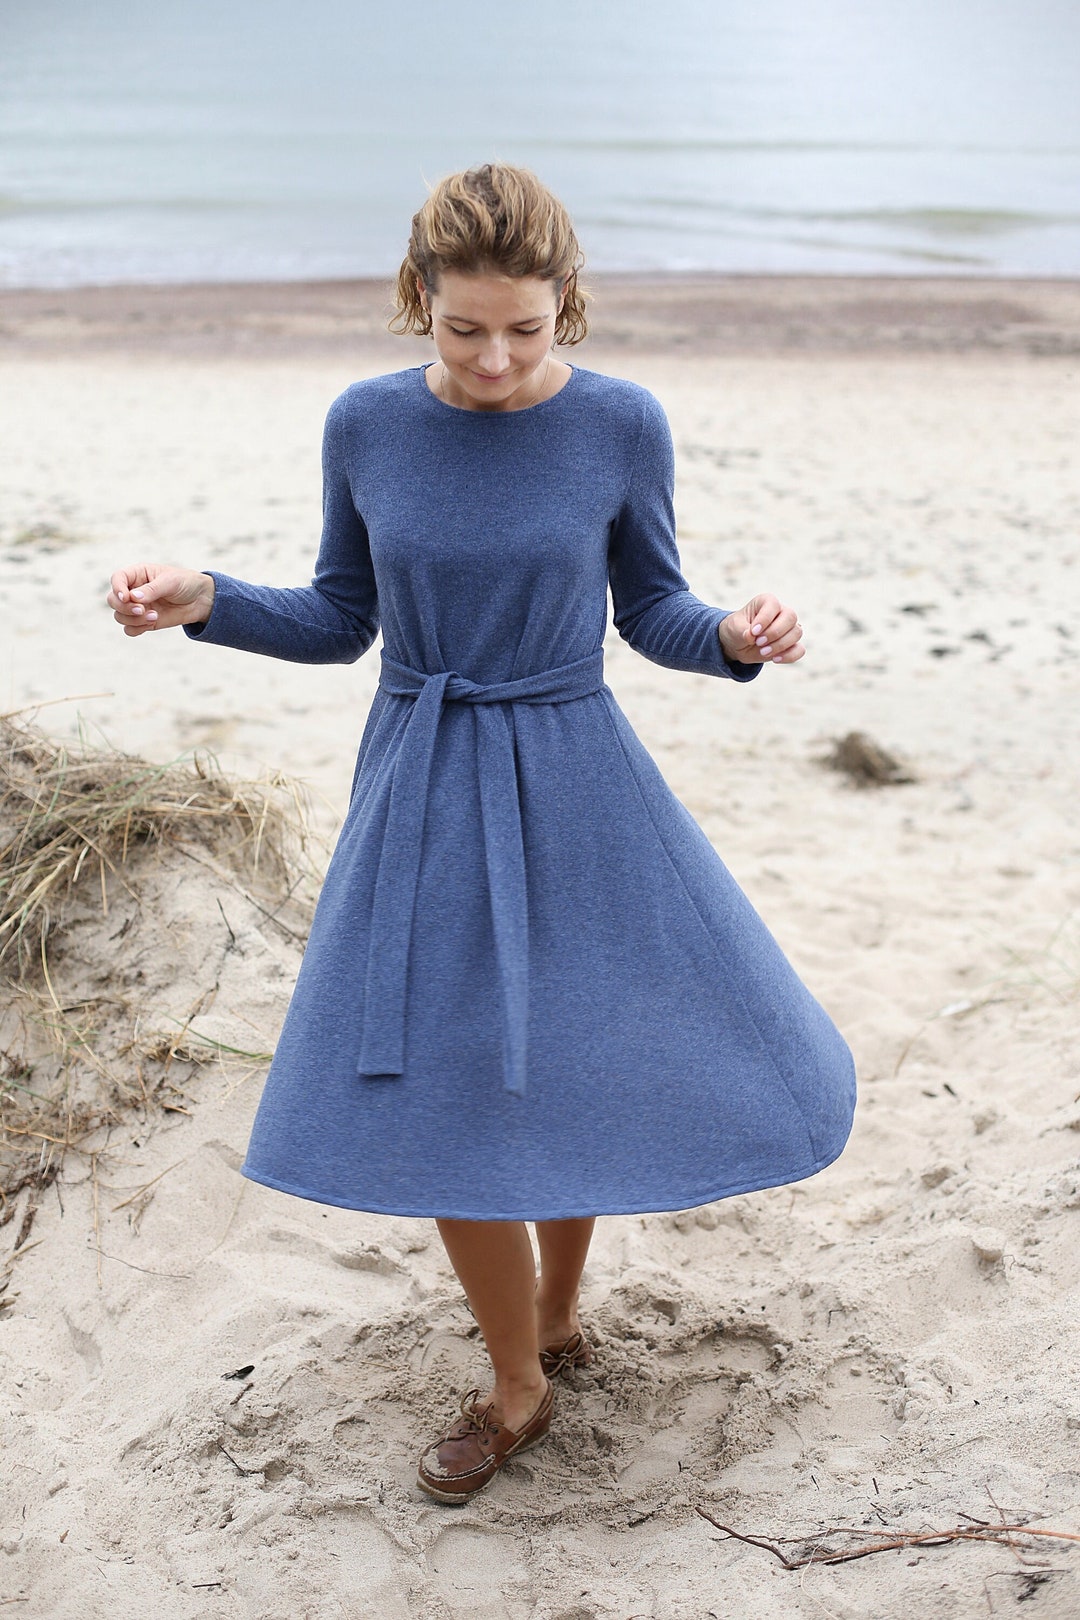 Natural Long With Eco Dress Wool Dress Etsy Dress Dress Elegant Dress Belt Dress Wide Dress - Wool A-line Occasional Skirt